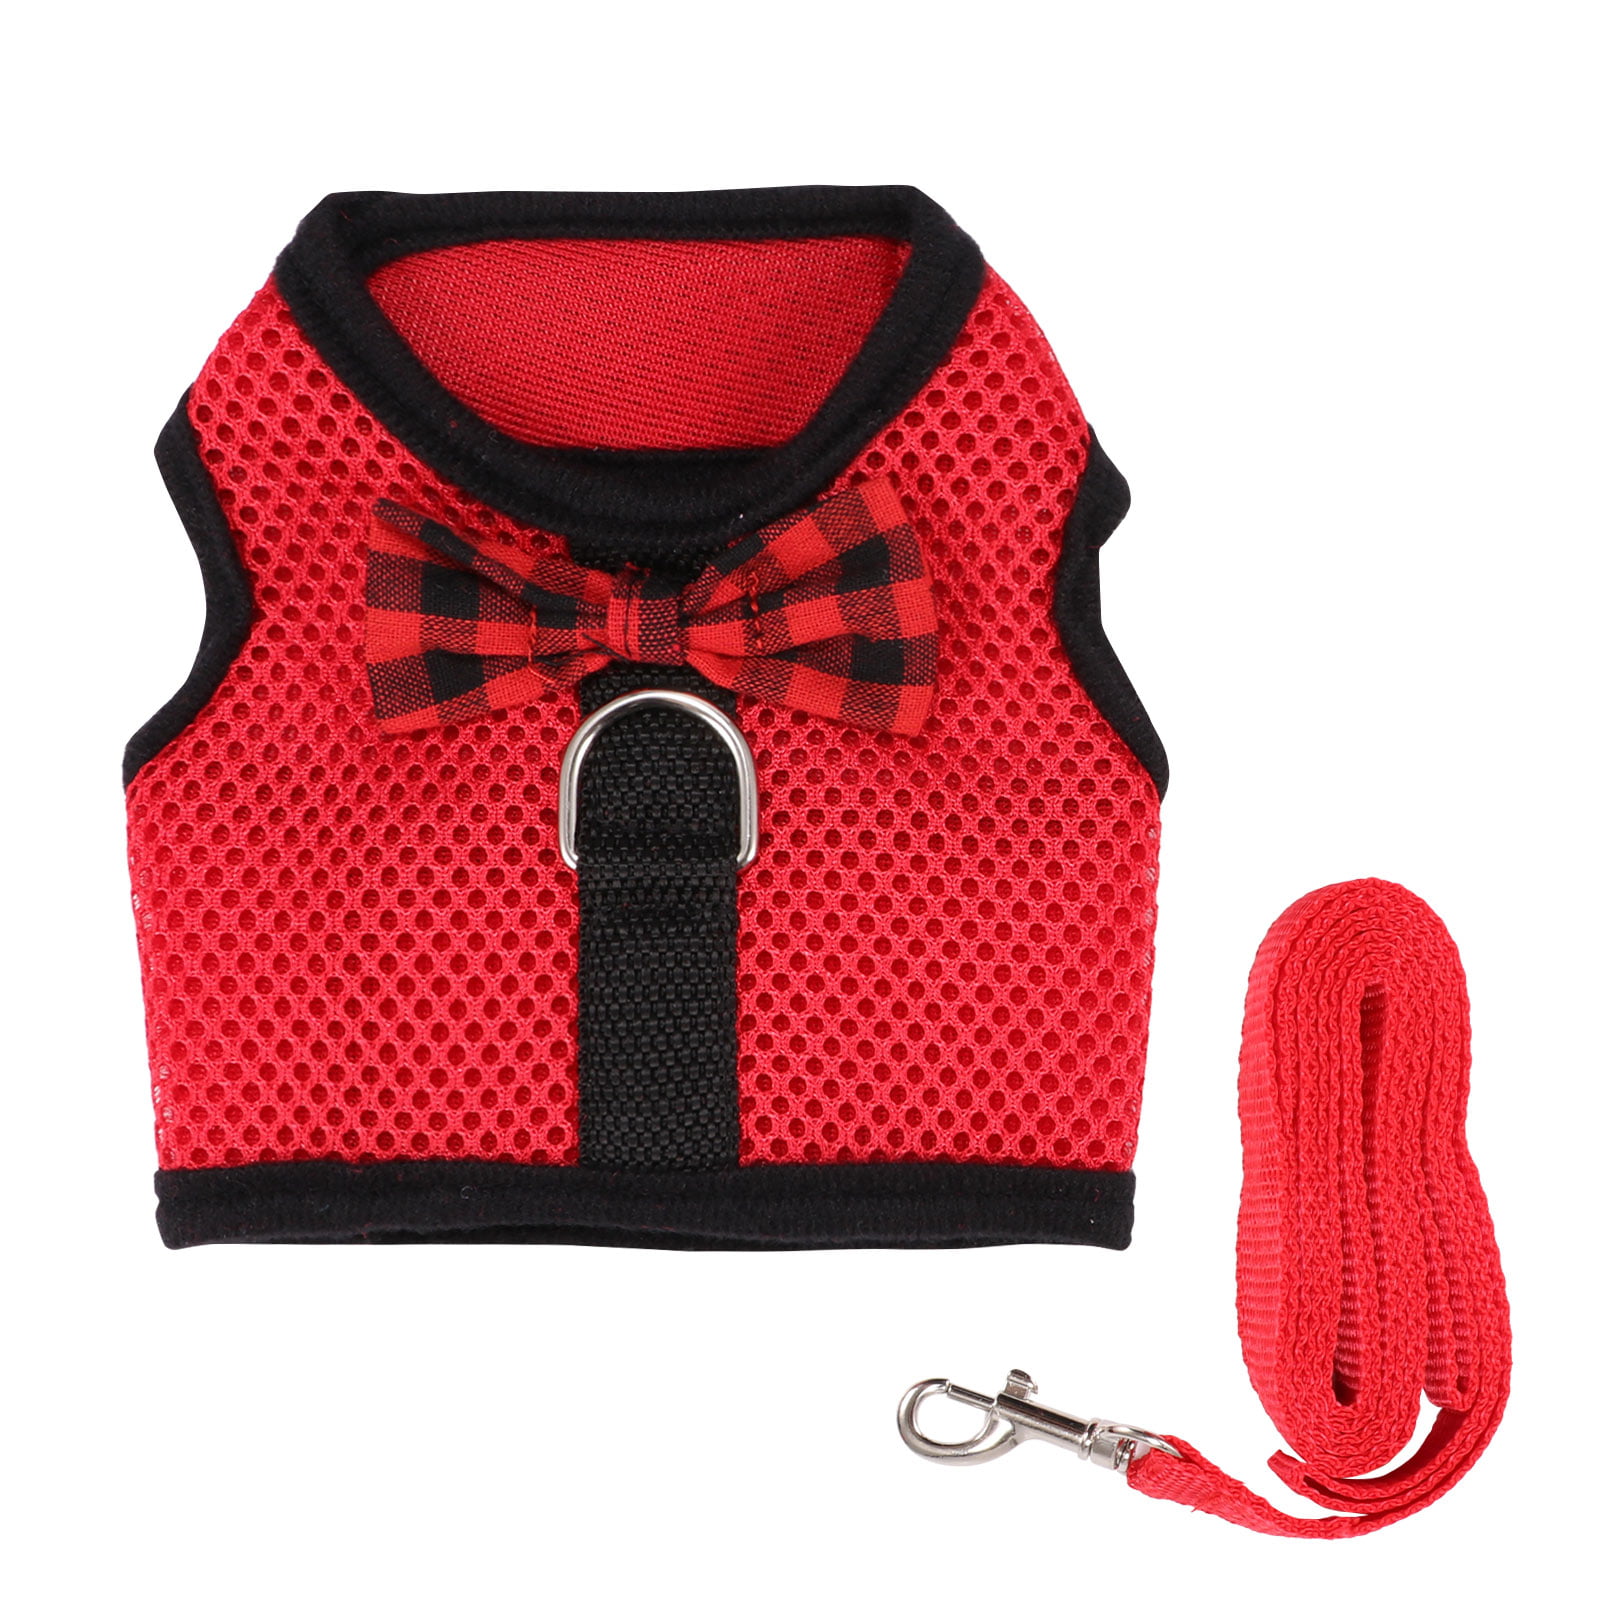 All Things Bunnies Rabbit Bowtie Vest Harness with Leash 